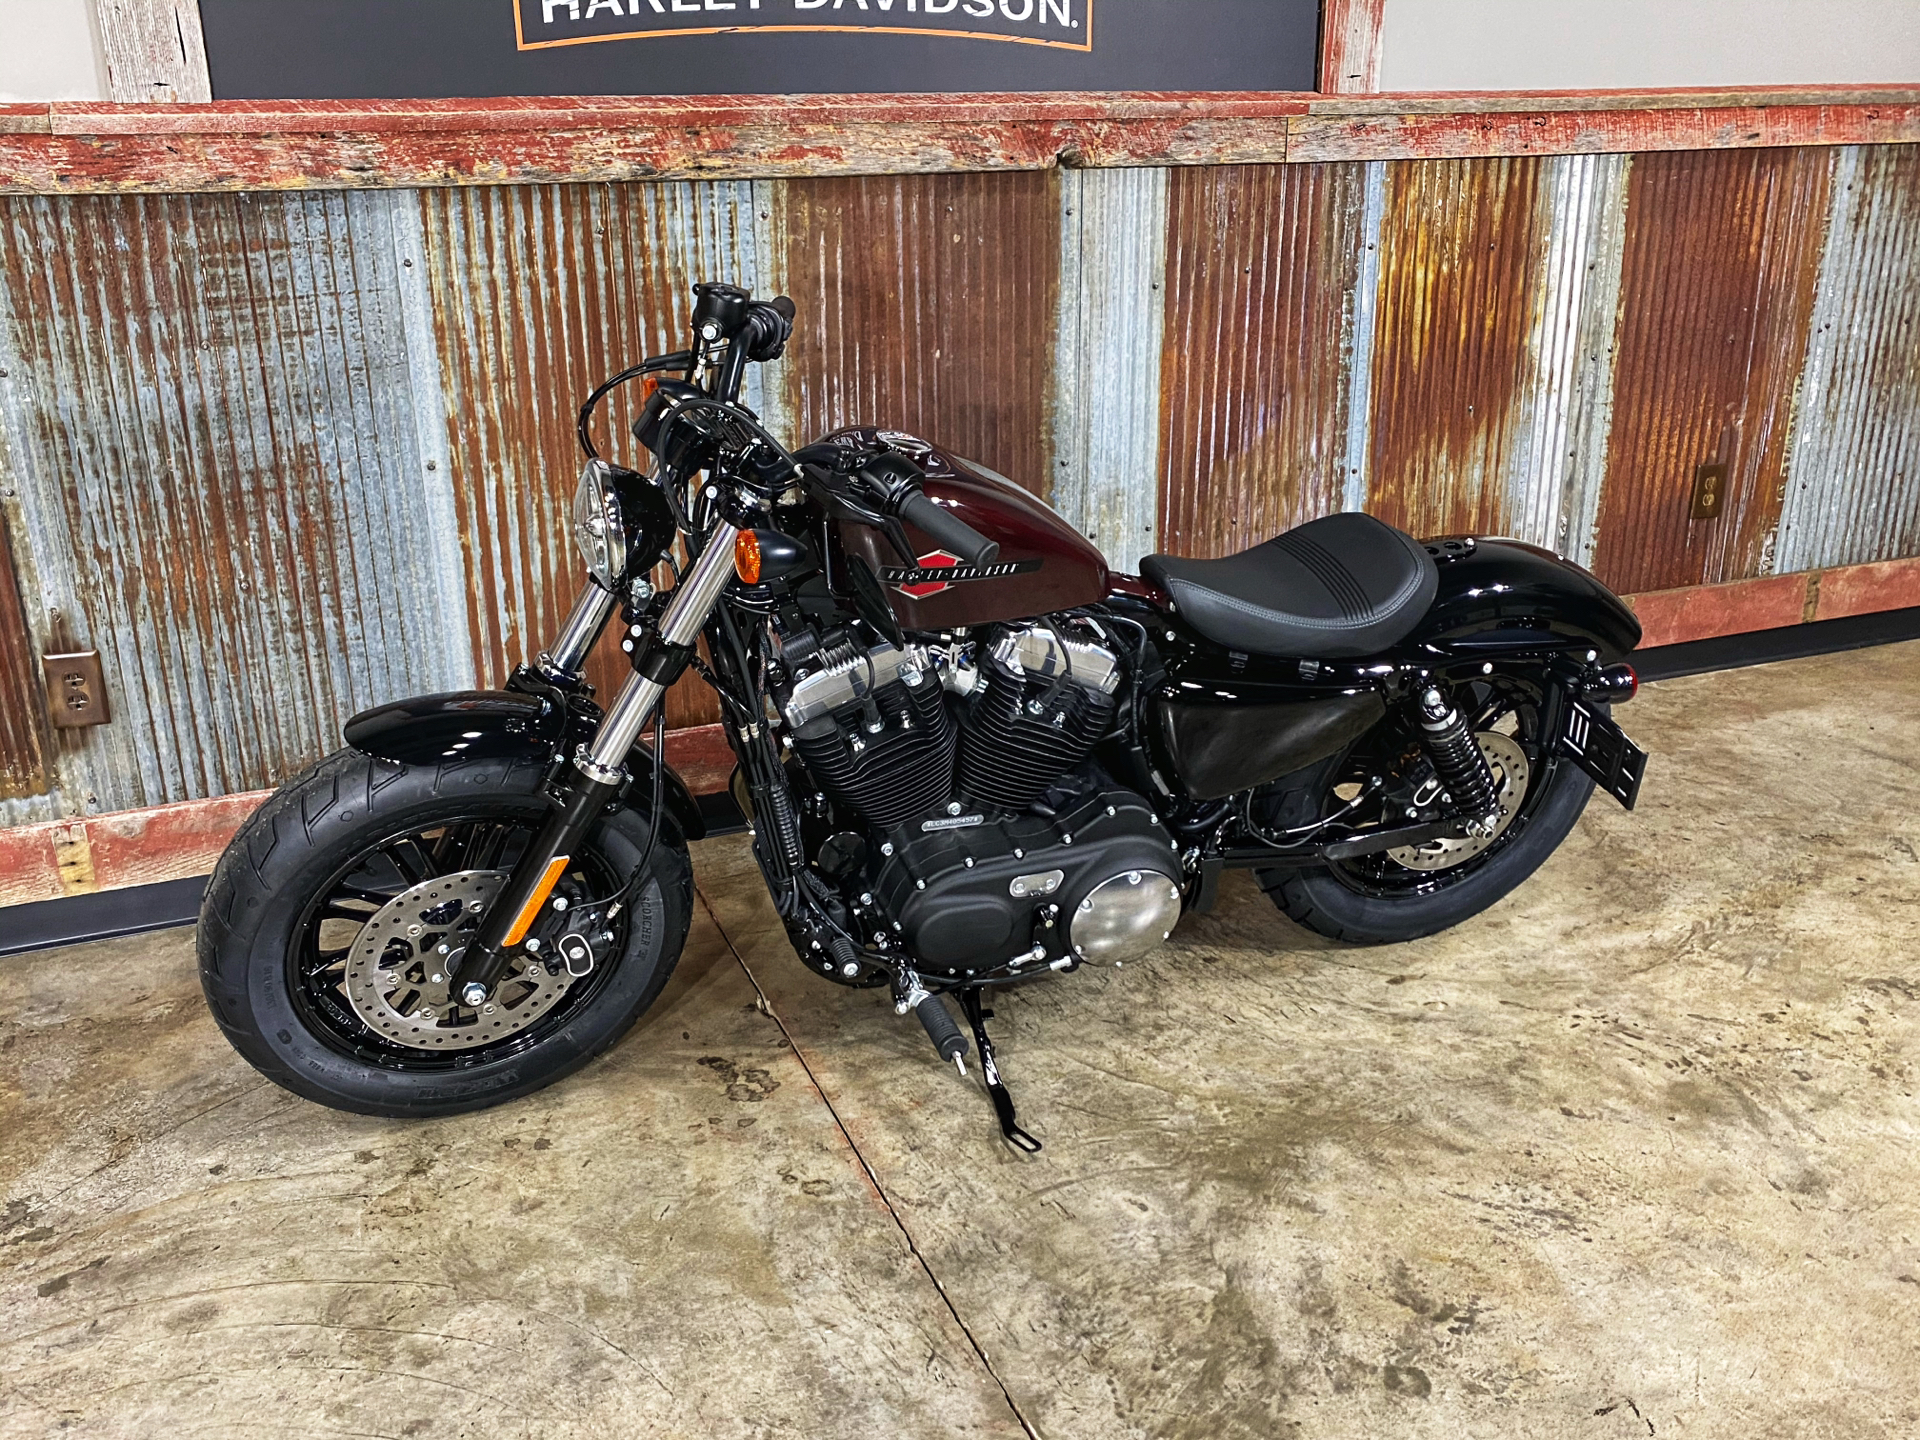 New 2021 Harley Davidson Forty Eight Midnight Crimson Motorcycles In Chippewa Falls Wi Xl405457